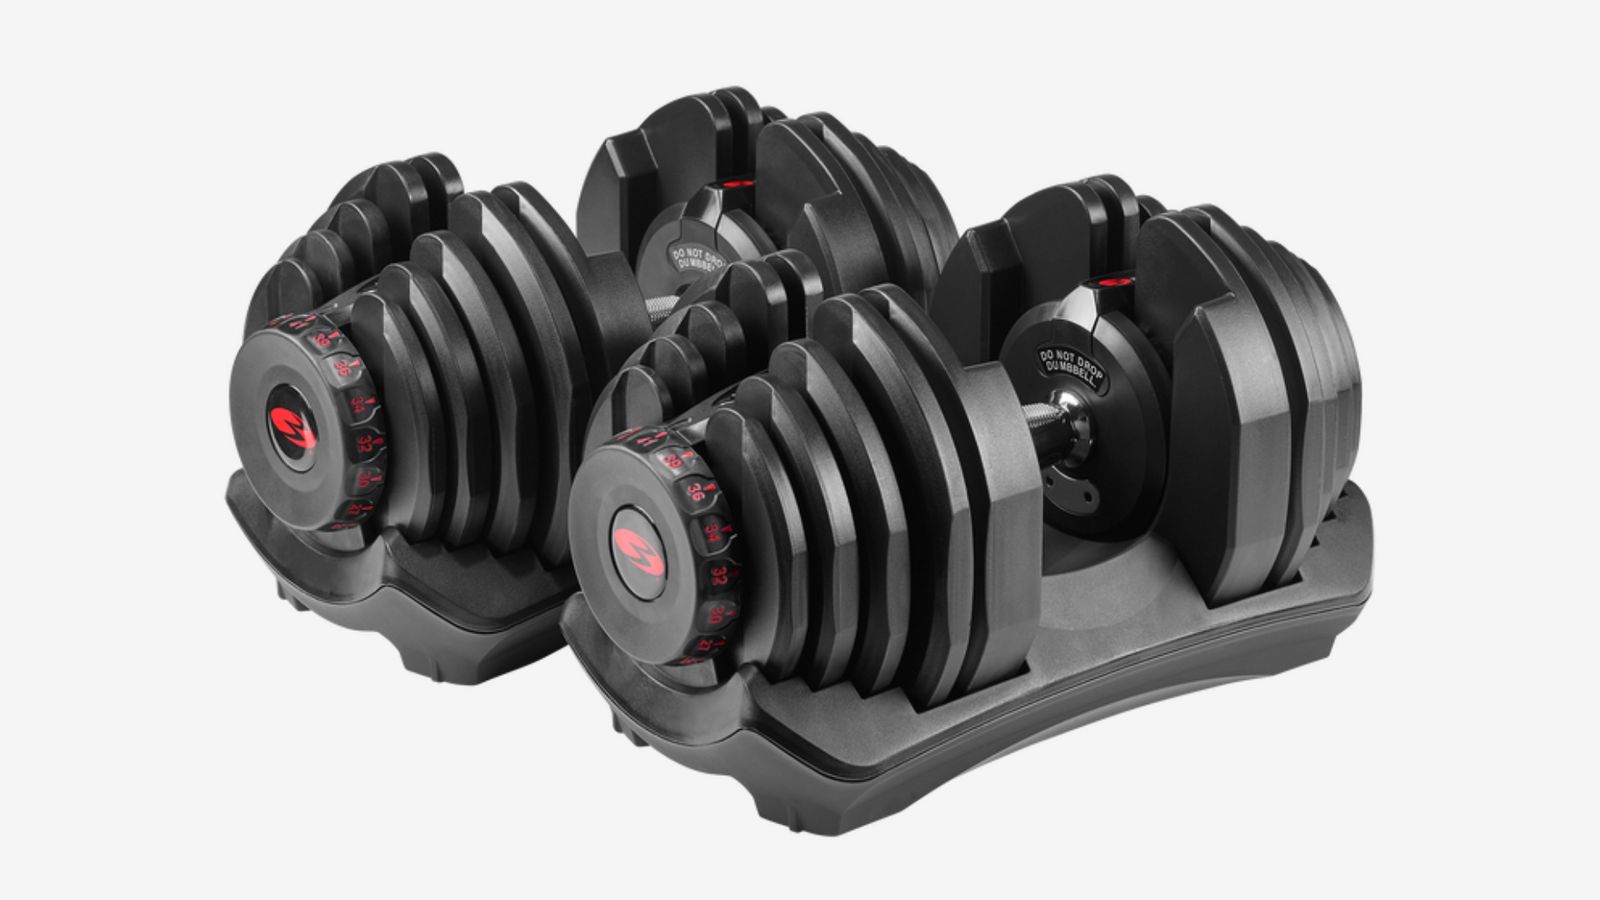 Bowflex SelectTech 1090i product image of a pair of black adjustable dumbbells in stands with red dials on the end.